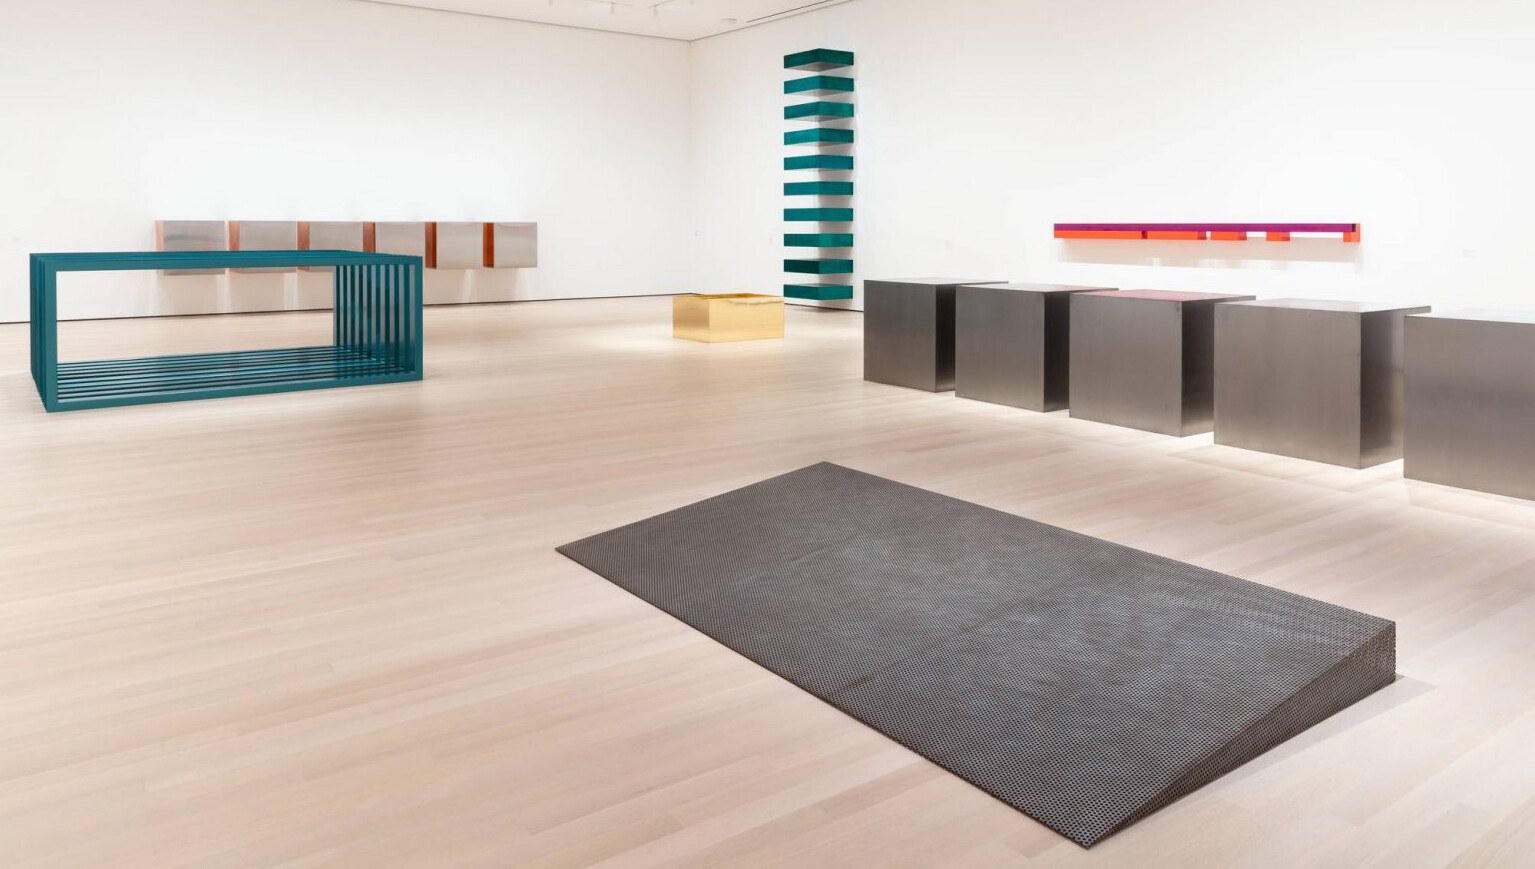 An installation view of an exhibition titled Judd at The Museum of modern Art in New York in 2020.